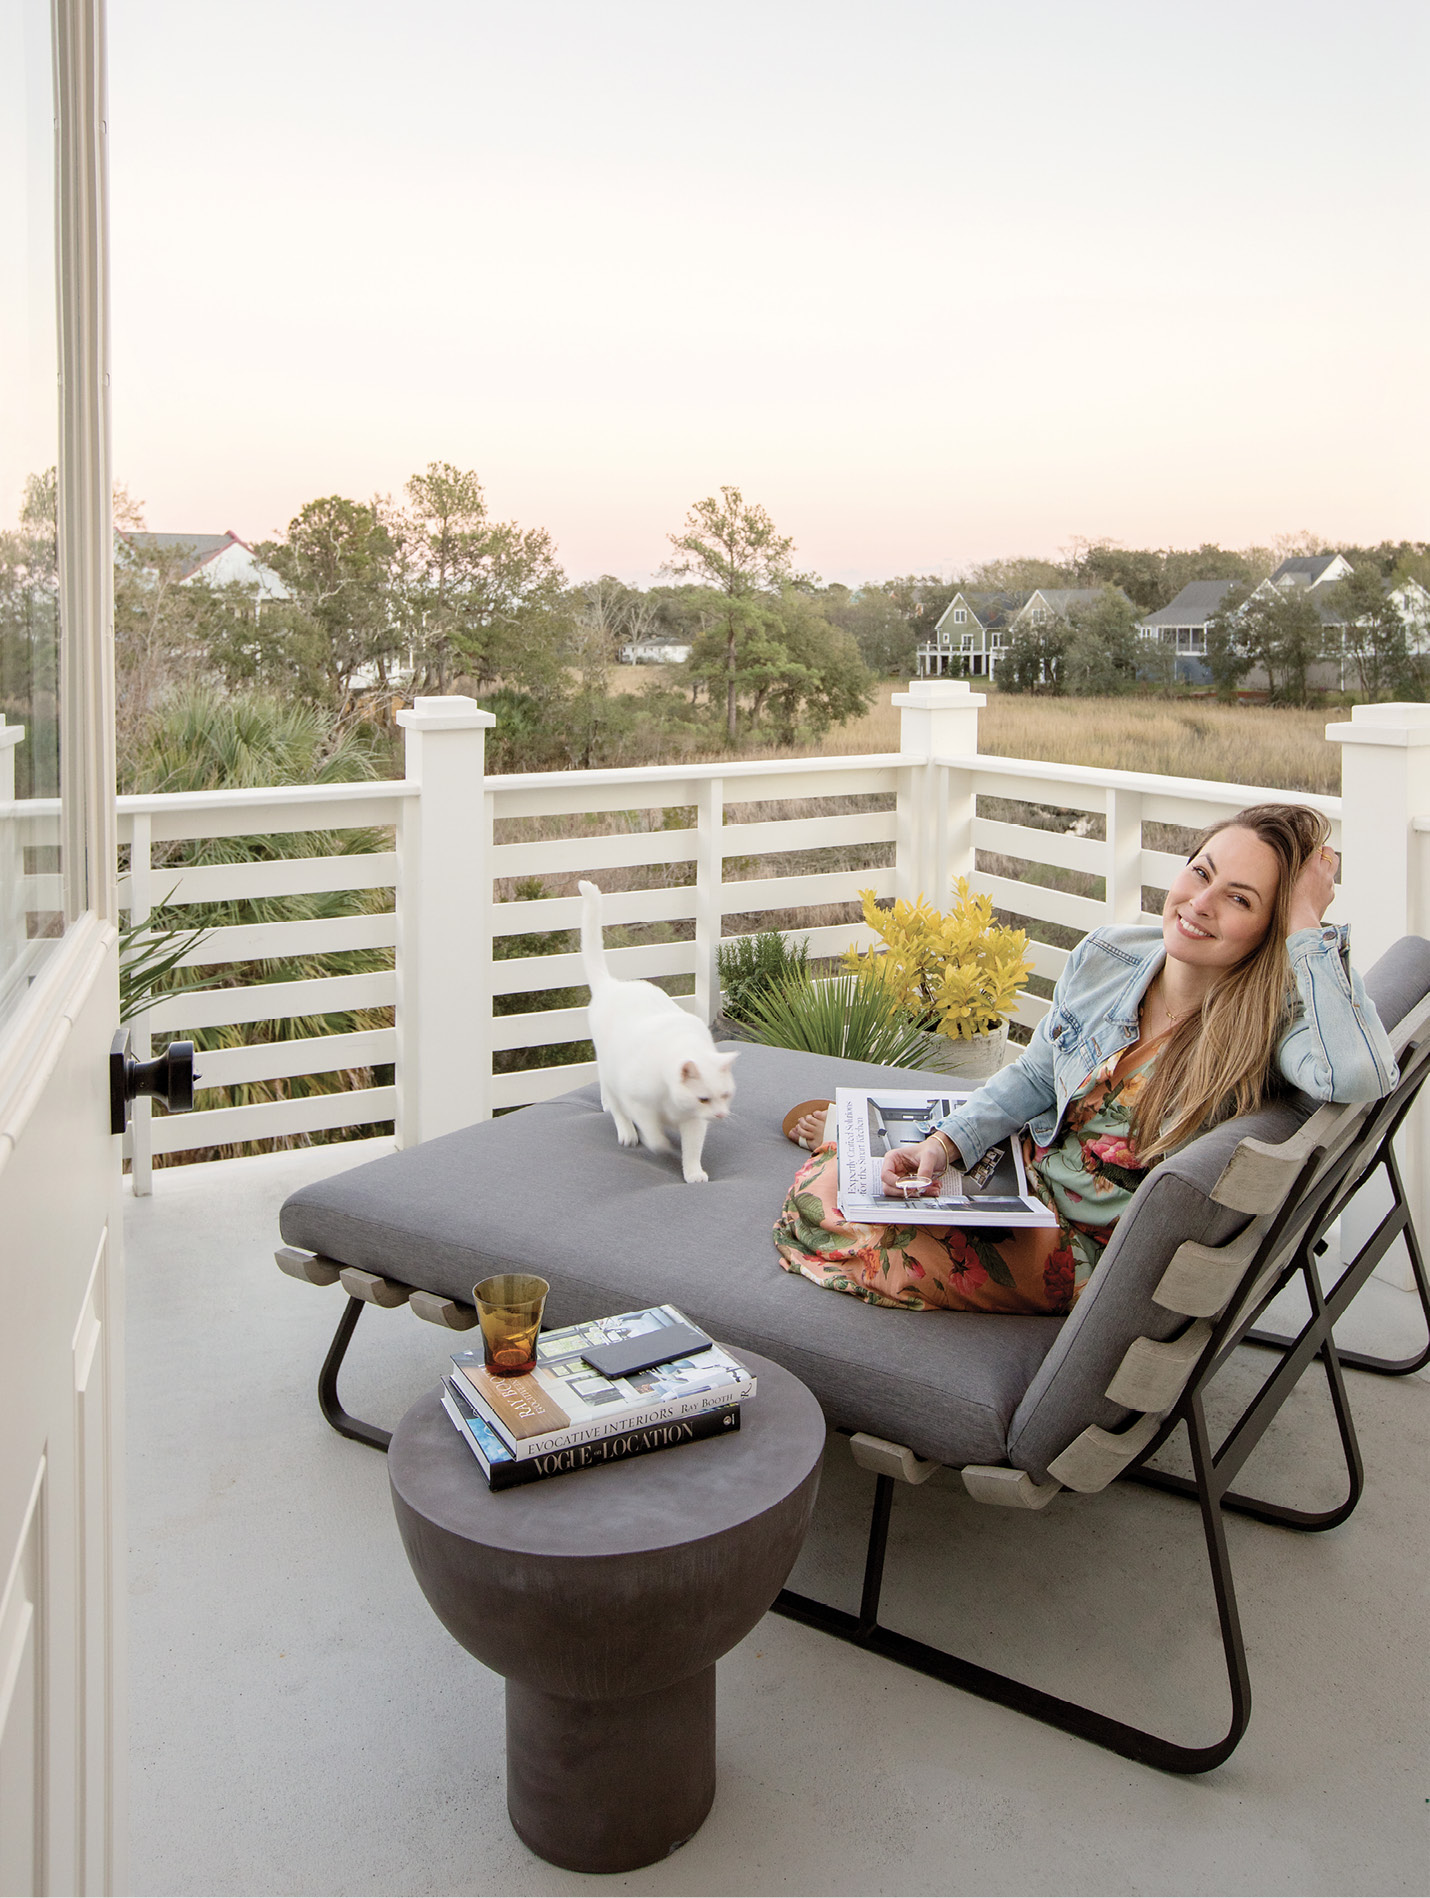 SEEKING SERENITY: It was the marsh view that drew Jesse Leigh Vickers to this North Charleston gem, and the top floor porch, outfitted with a double chaise by Four Hands and table by CB2, is the perfect place to read, relax, and soak up the scenery with her cuddly cat, Pickles.